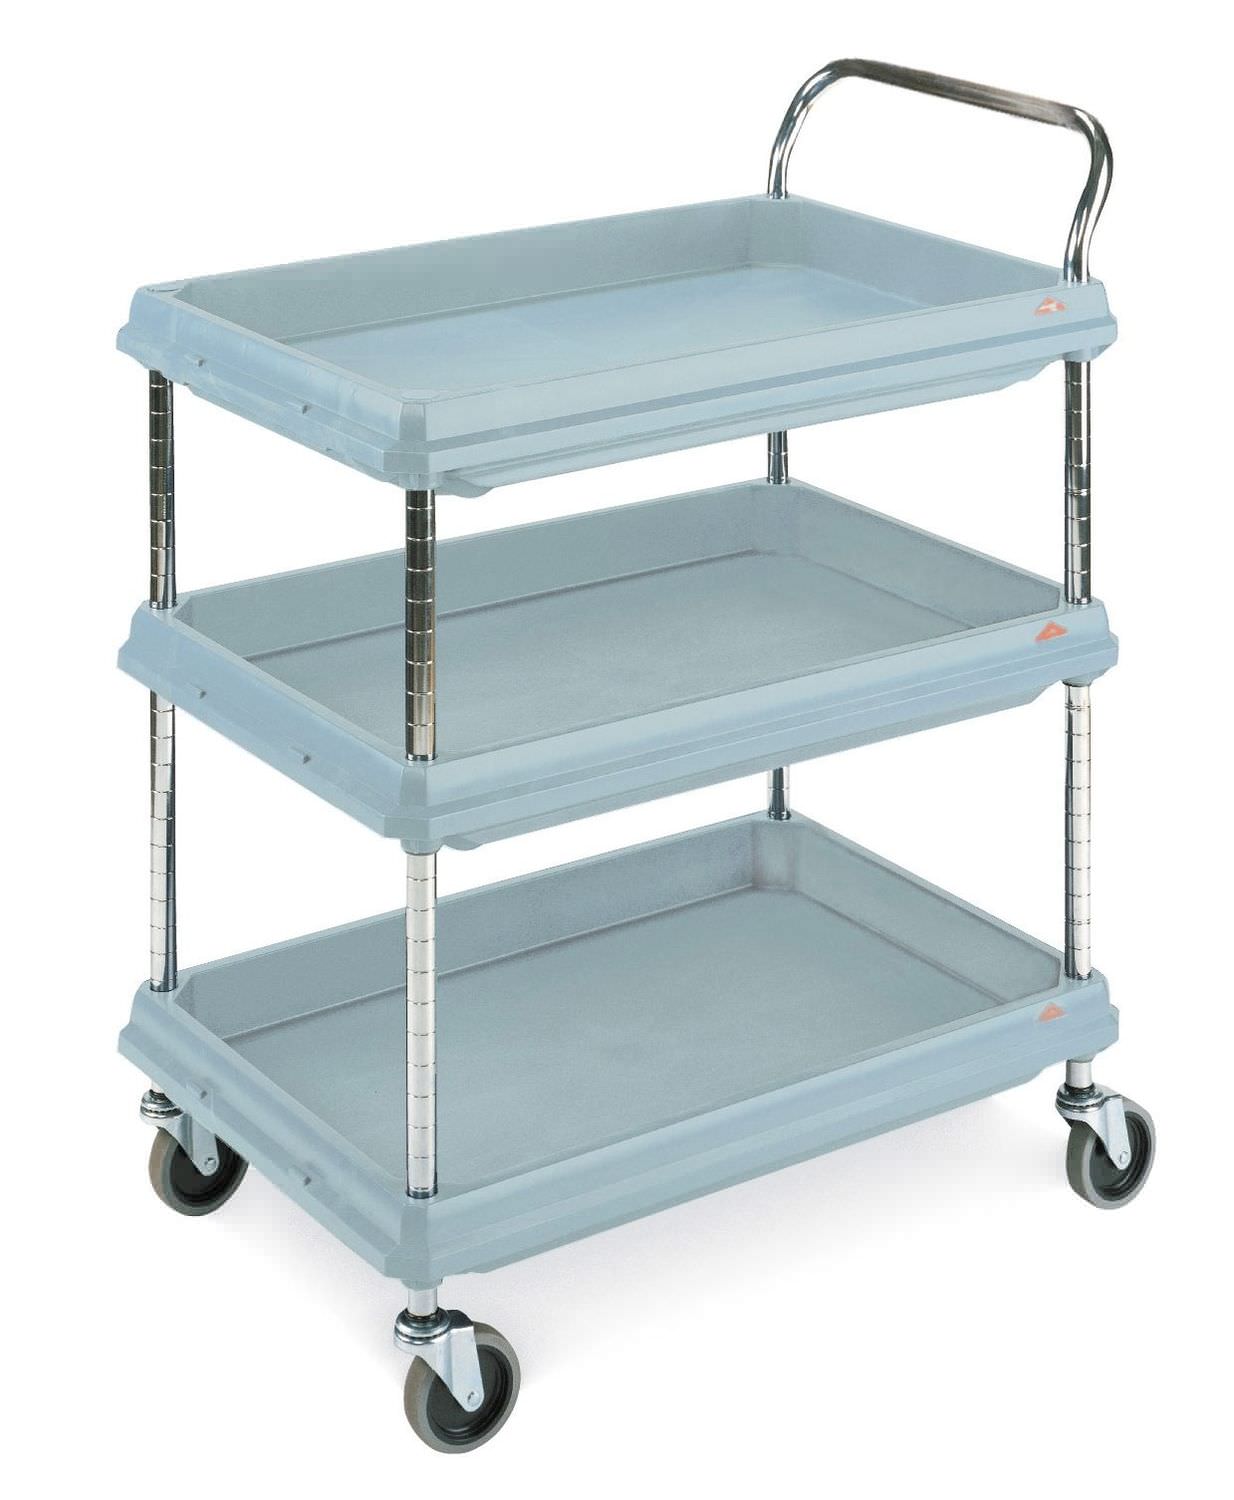 Treatment trolley / 3-tray DL MICROBAN® - 636.193 Sclessin Productions